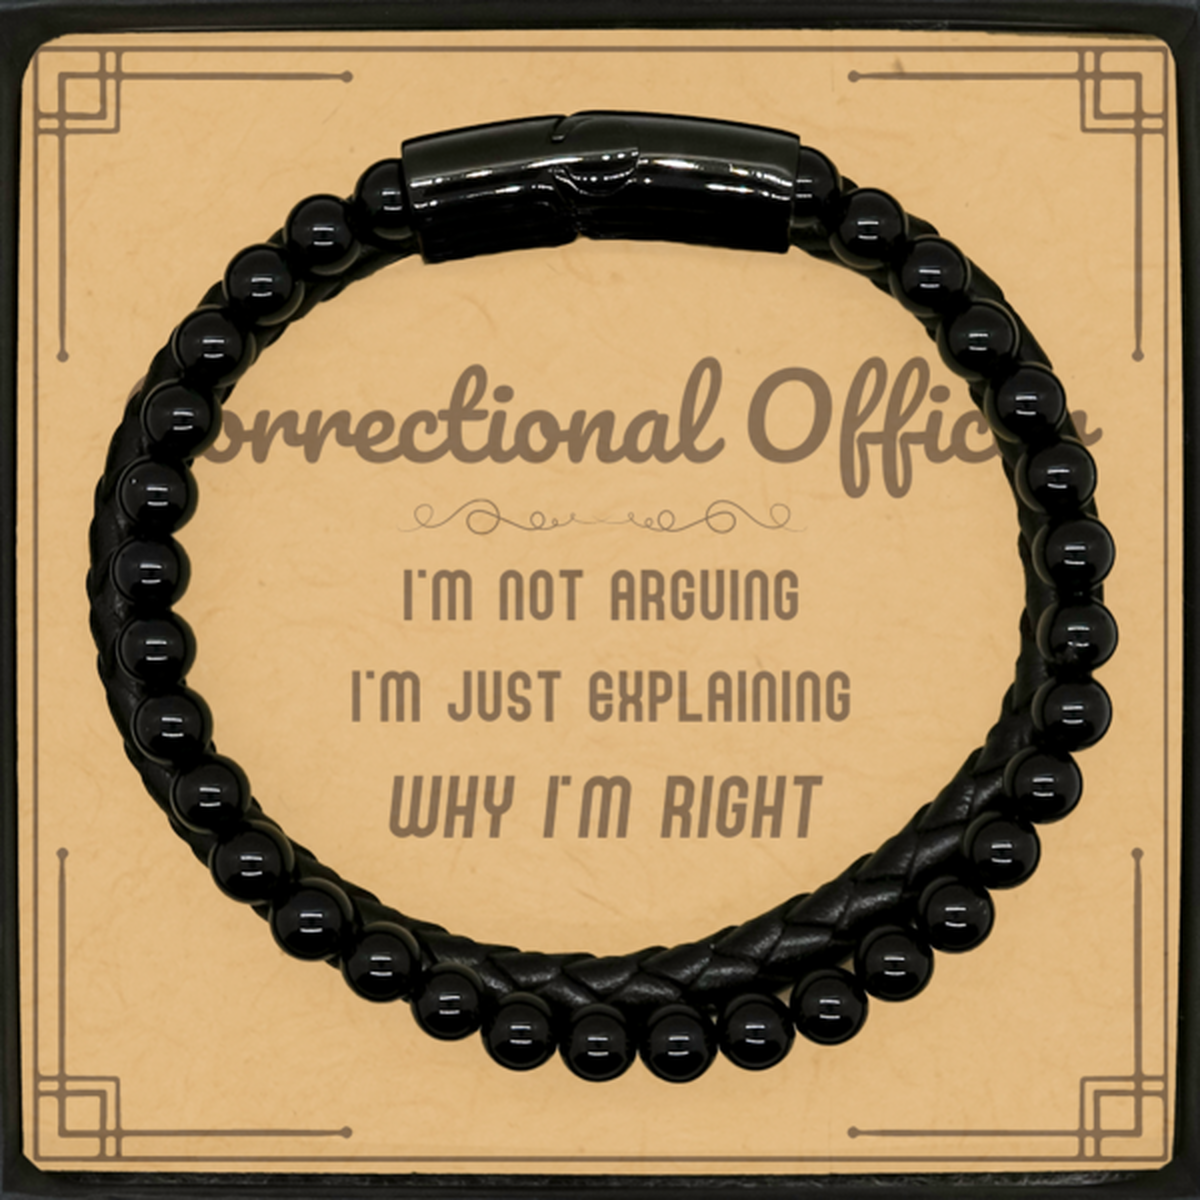 Correctional Officer I'm not Arguing. I'm Just Explaining Why I'm RIGHT Stone Leather Bracelets, Funny Saying Quote Correctional Officer Gifts For Correctional Officer Message Card Graduation Birthday Christmas Gifts for Men Women Coworker